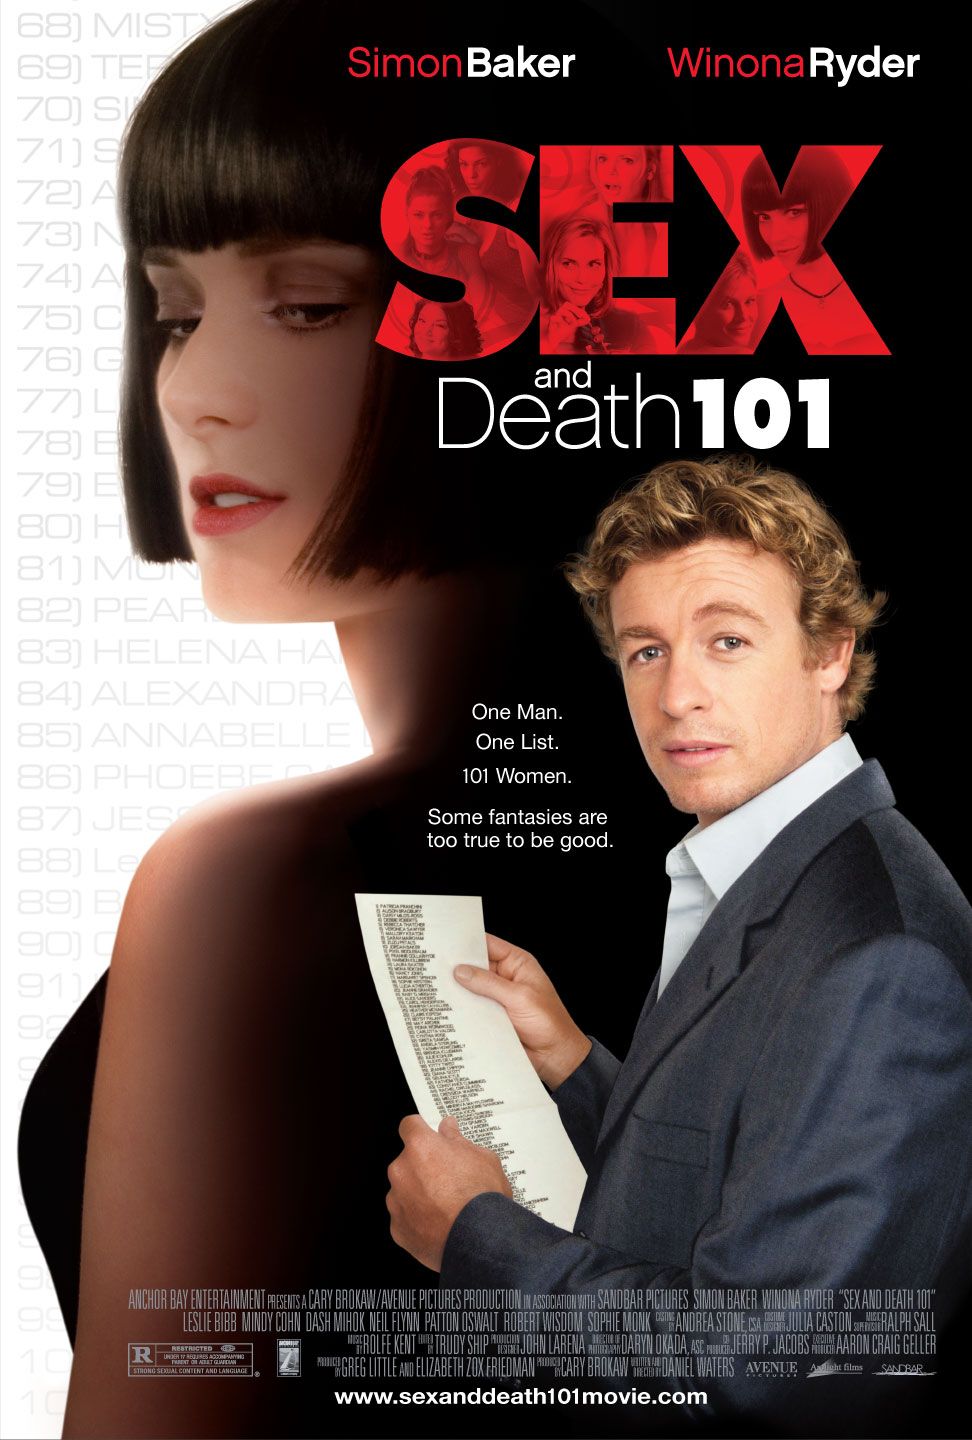 Extra Large Movie Poster Image for Sex and Death 101 